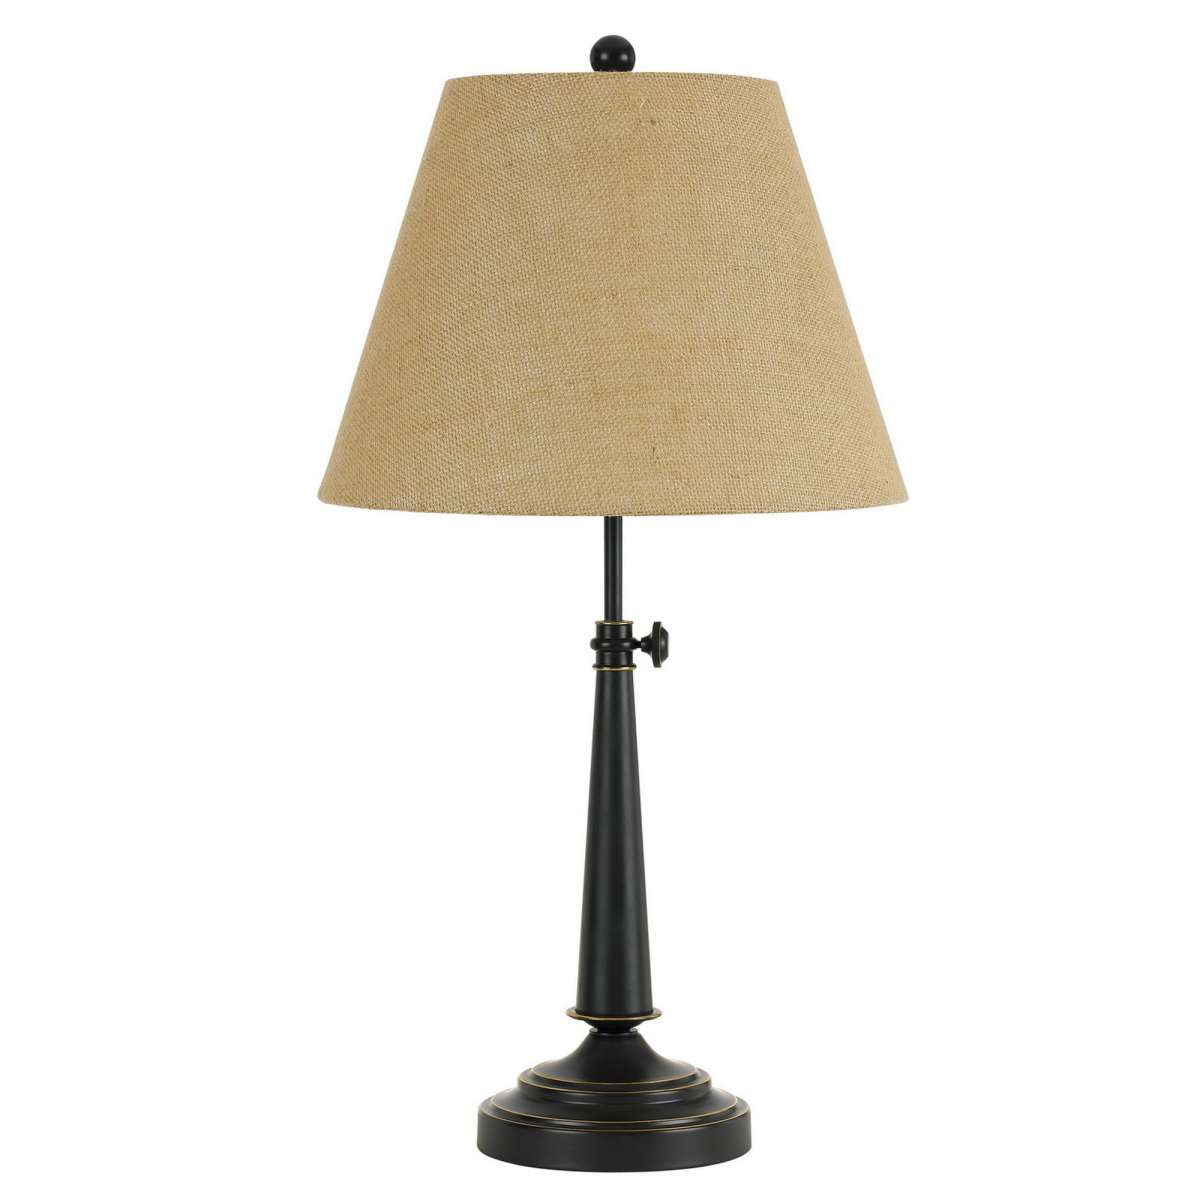 Tapered Fabric Adjustable Table Lamp With Pedestal Base, Beige And Black By Benzara